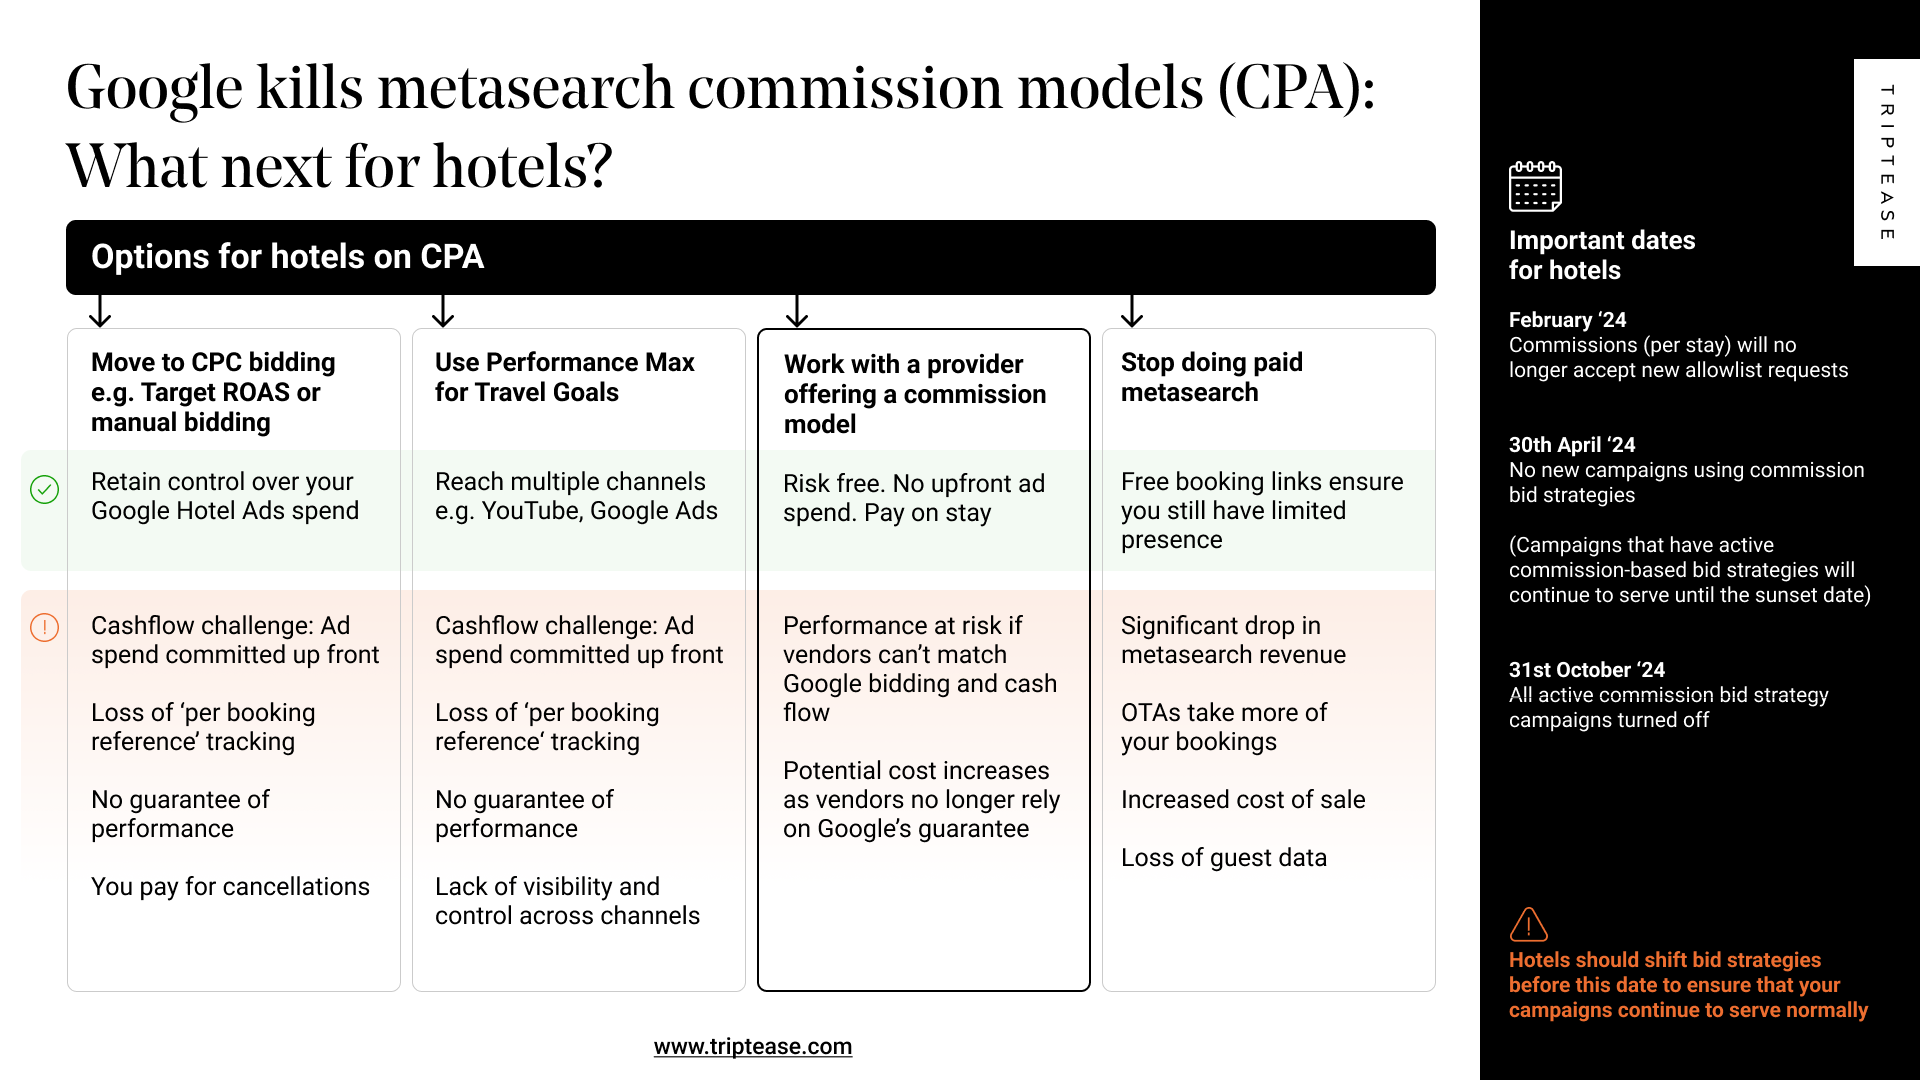 Detailed overview of what hotels need to do following the announcement of Google sunsetting metasearch commission models